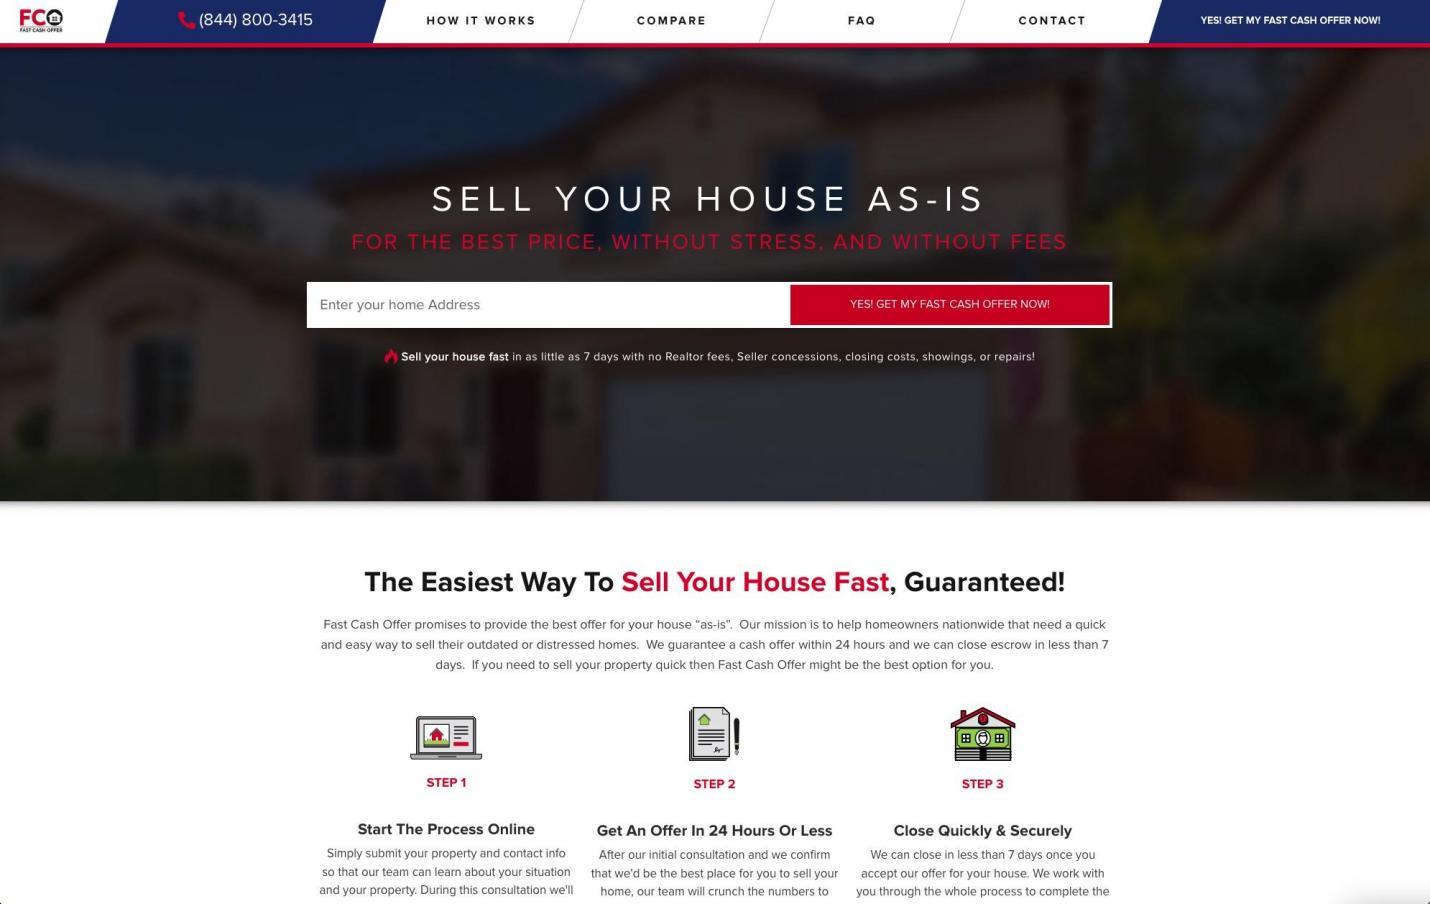 Sell Your House As-Is